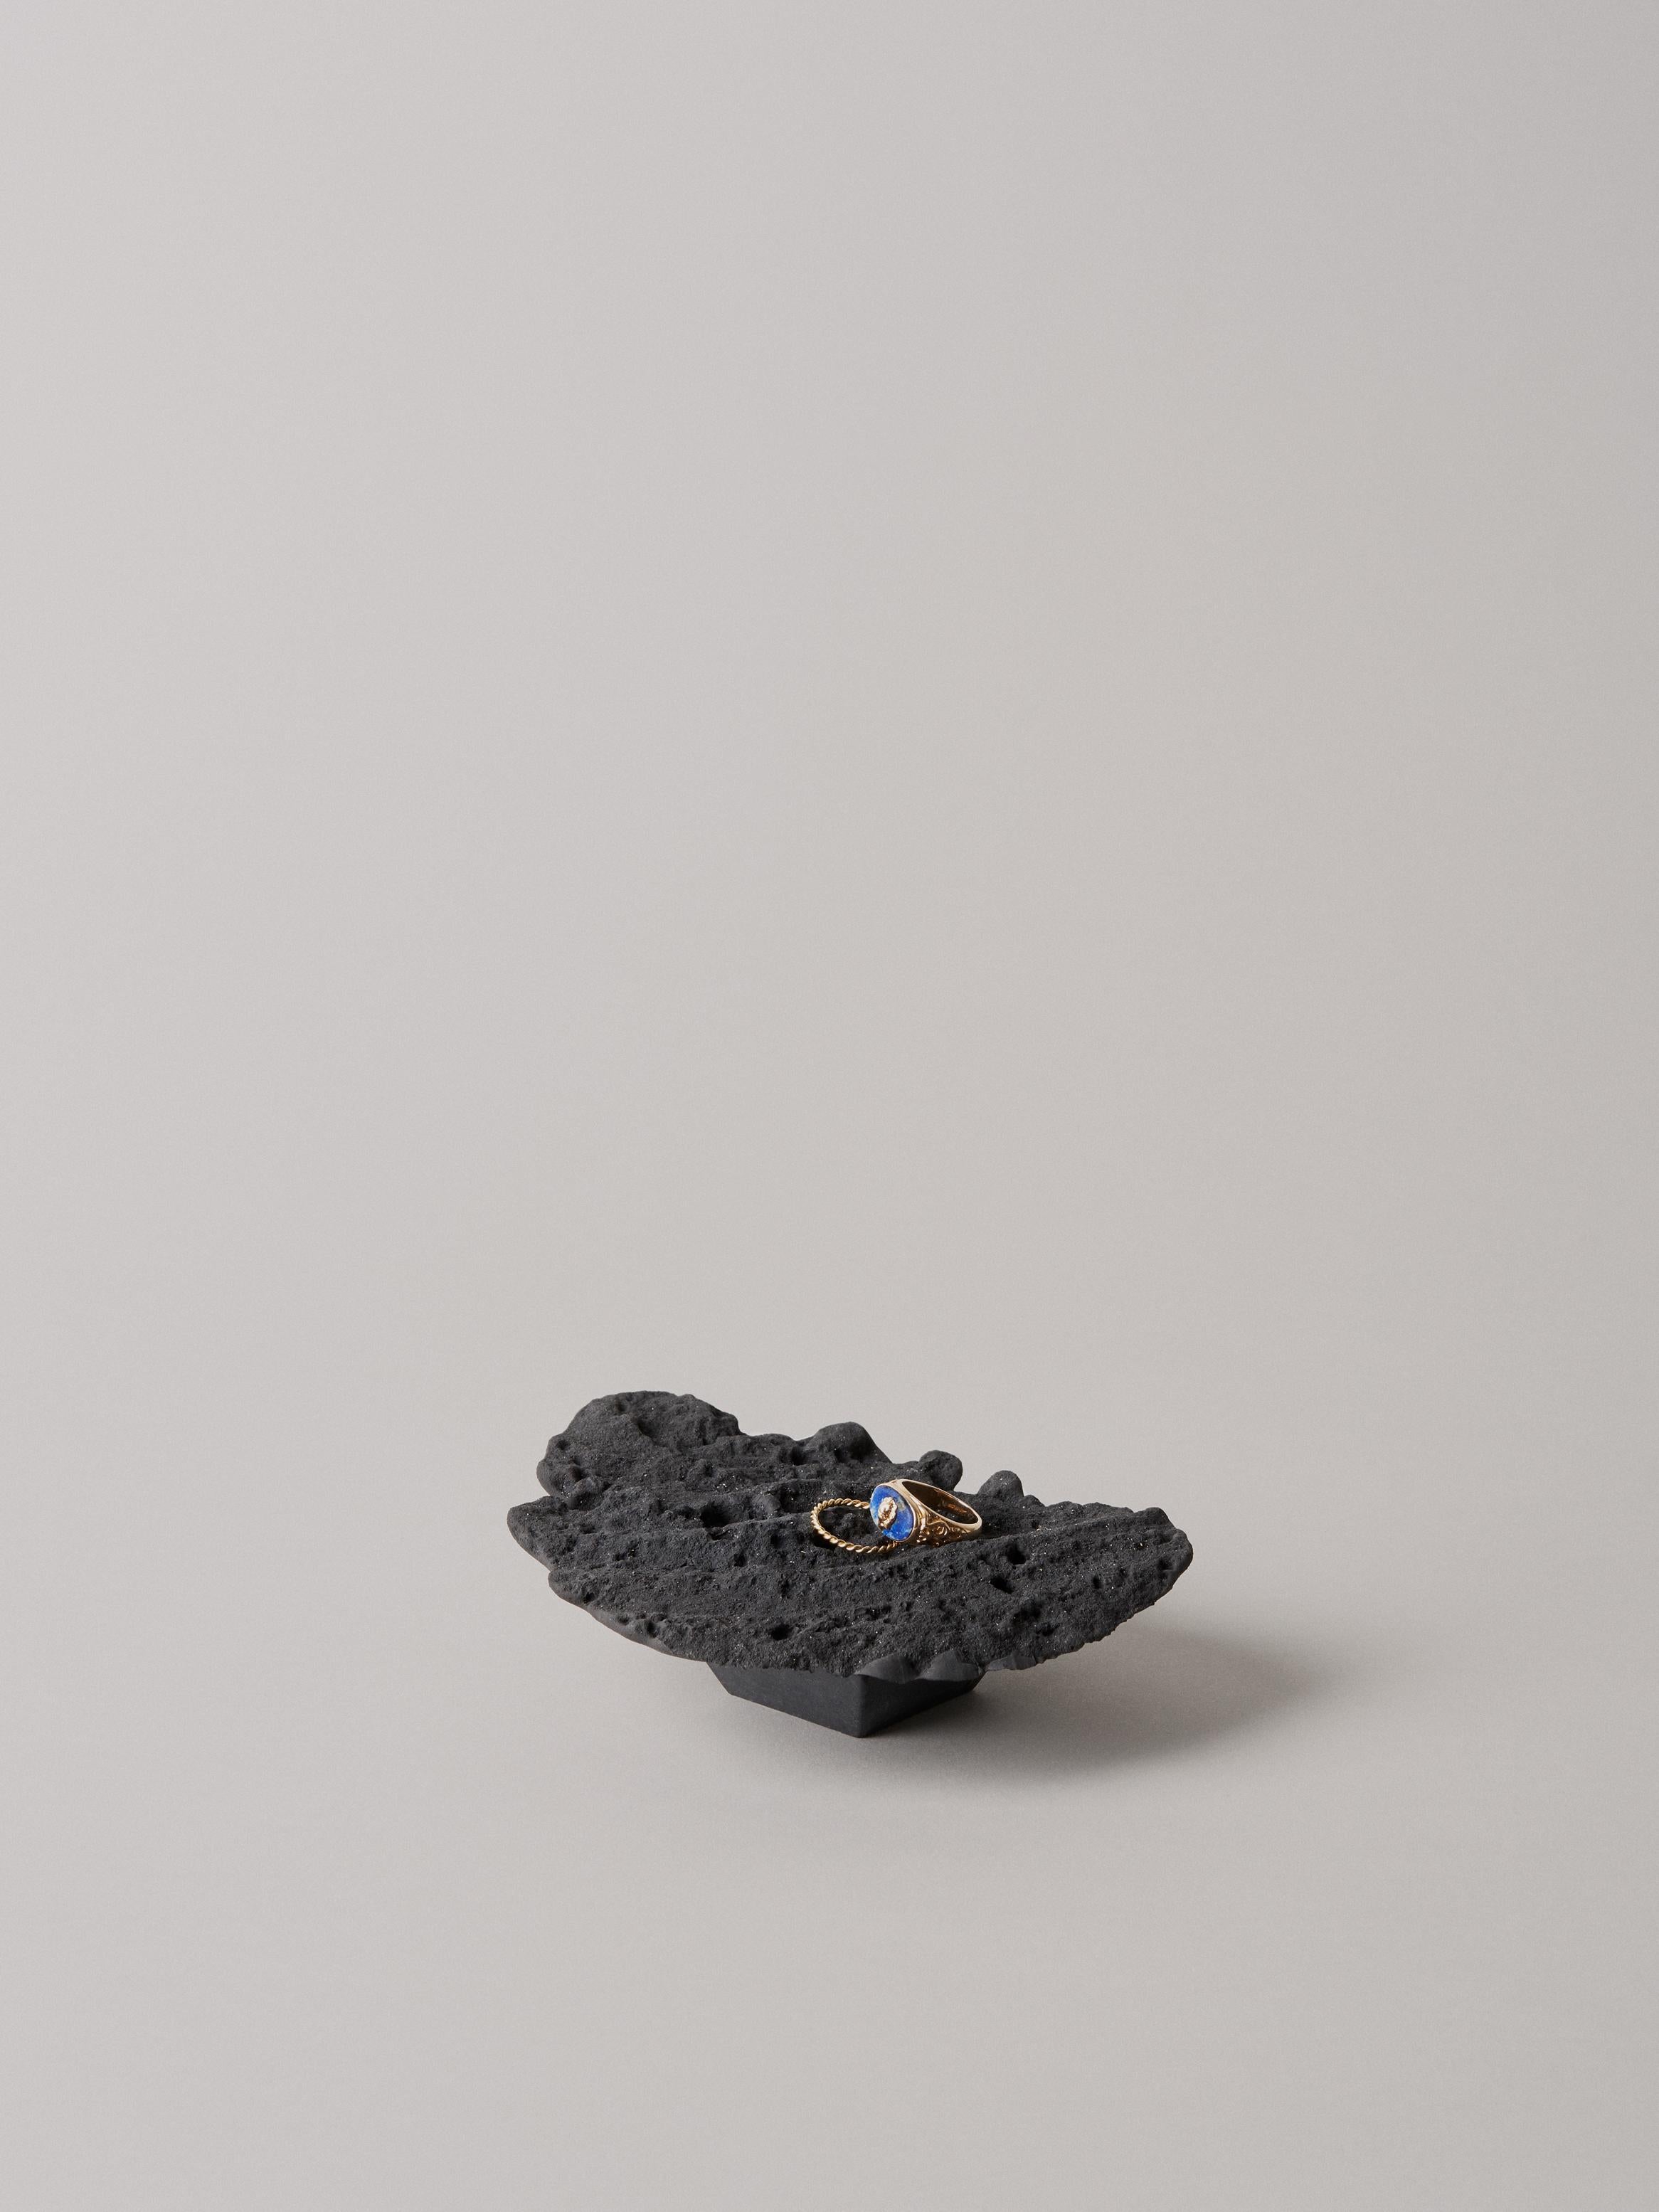 Lava bed serving plate by Kajsa Melchior
Fictive Erosion collection
Dimensions: H: Approx. 4 cm
 Ø: Approx. 40 cm
Materials: Sculpted in sand by Pressaure from air and water
 Developed in acrystal, colored by coal

This piece is also